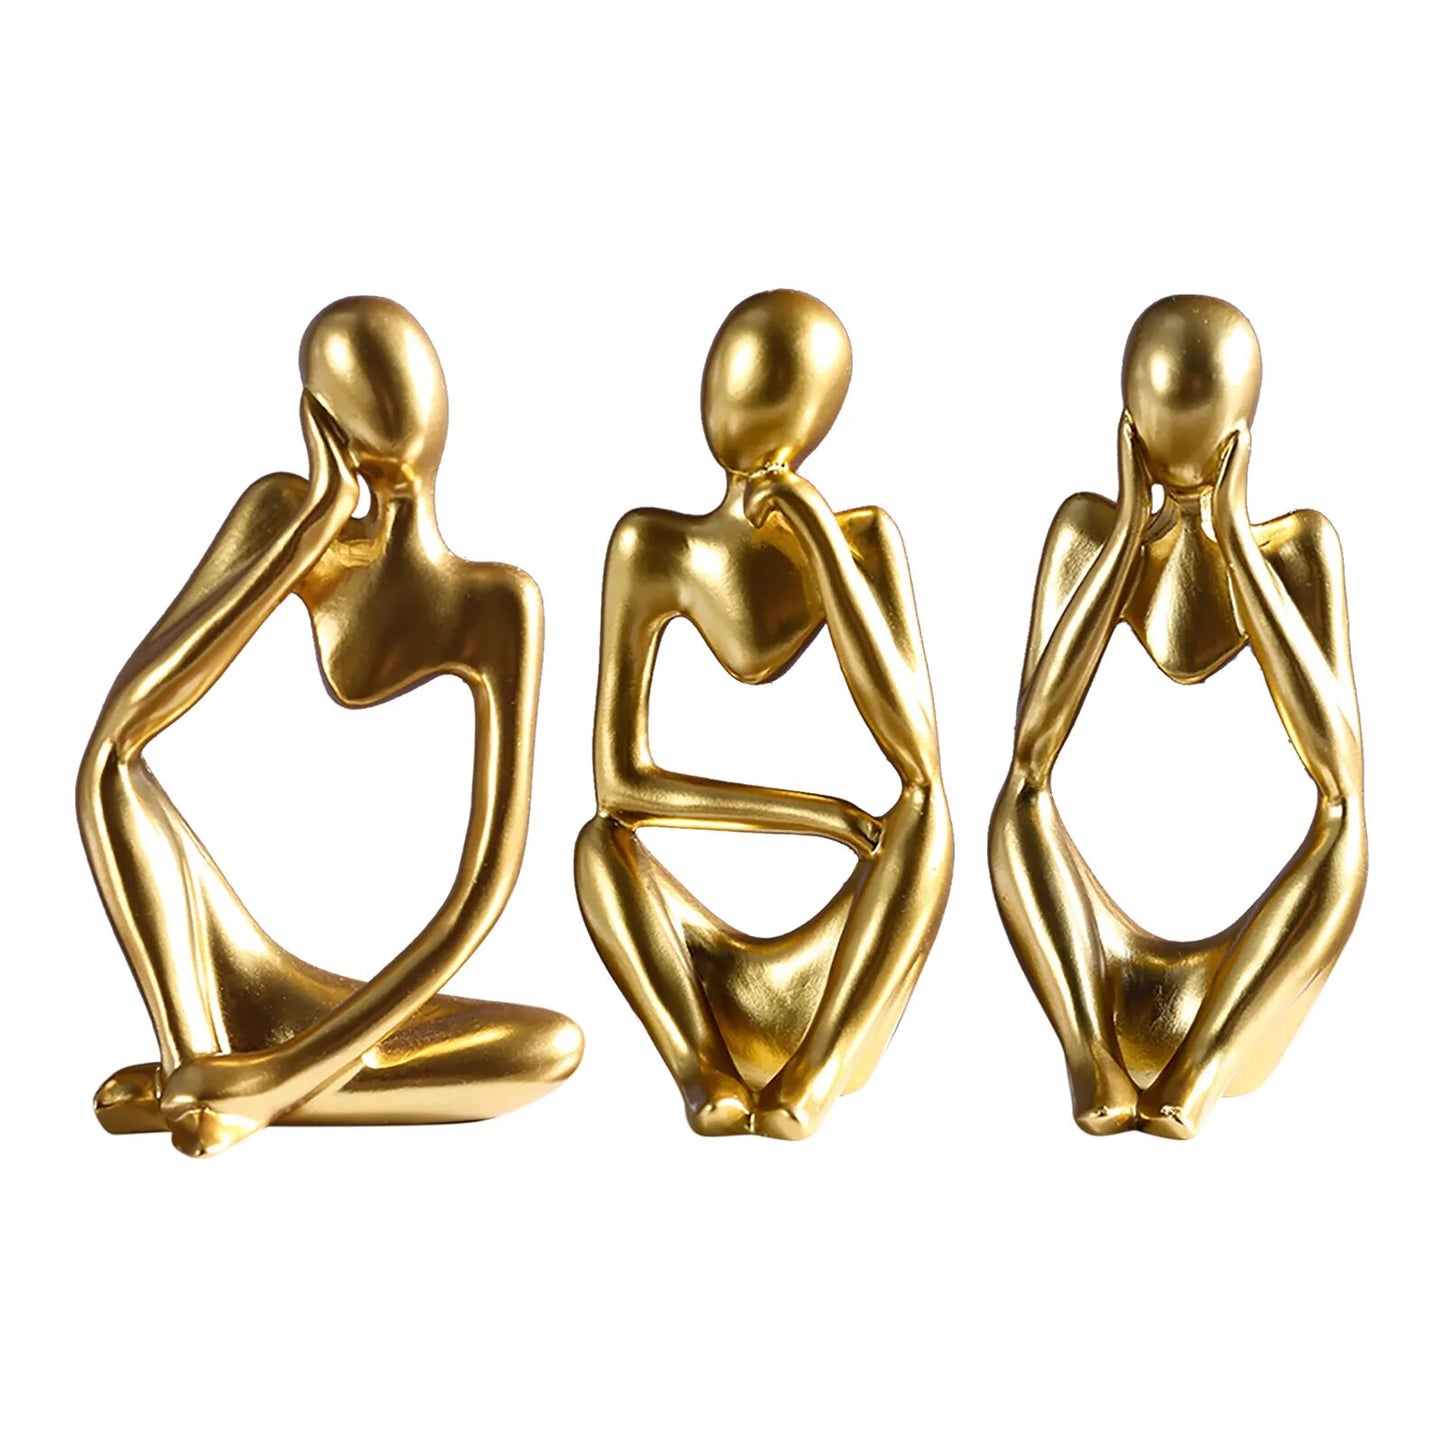 3pcs Thinker Statue Abstract Art Sculpture Gold Resin Collectible Figures for Home Living Room Office Shelf Decoration 